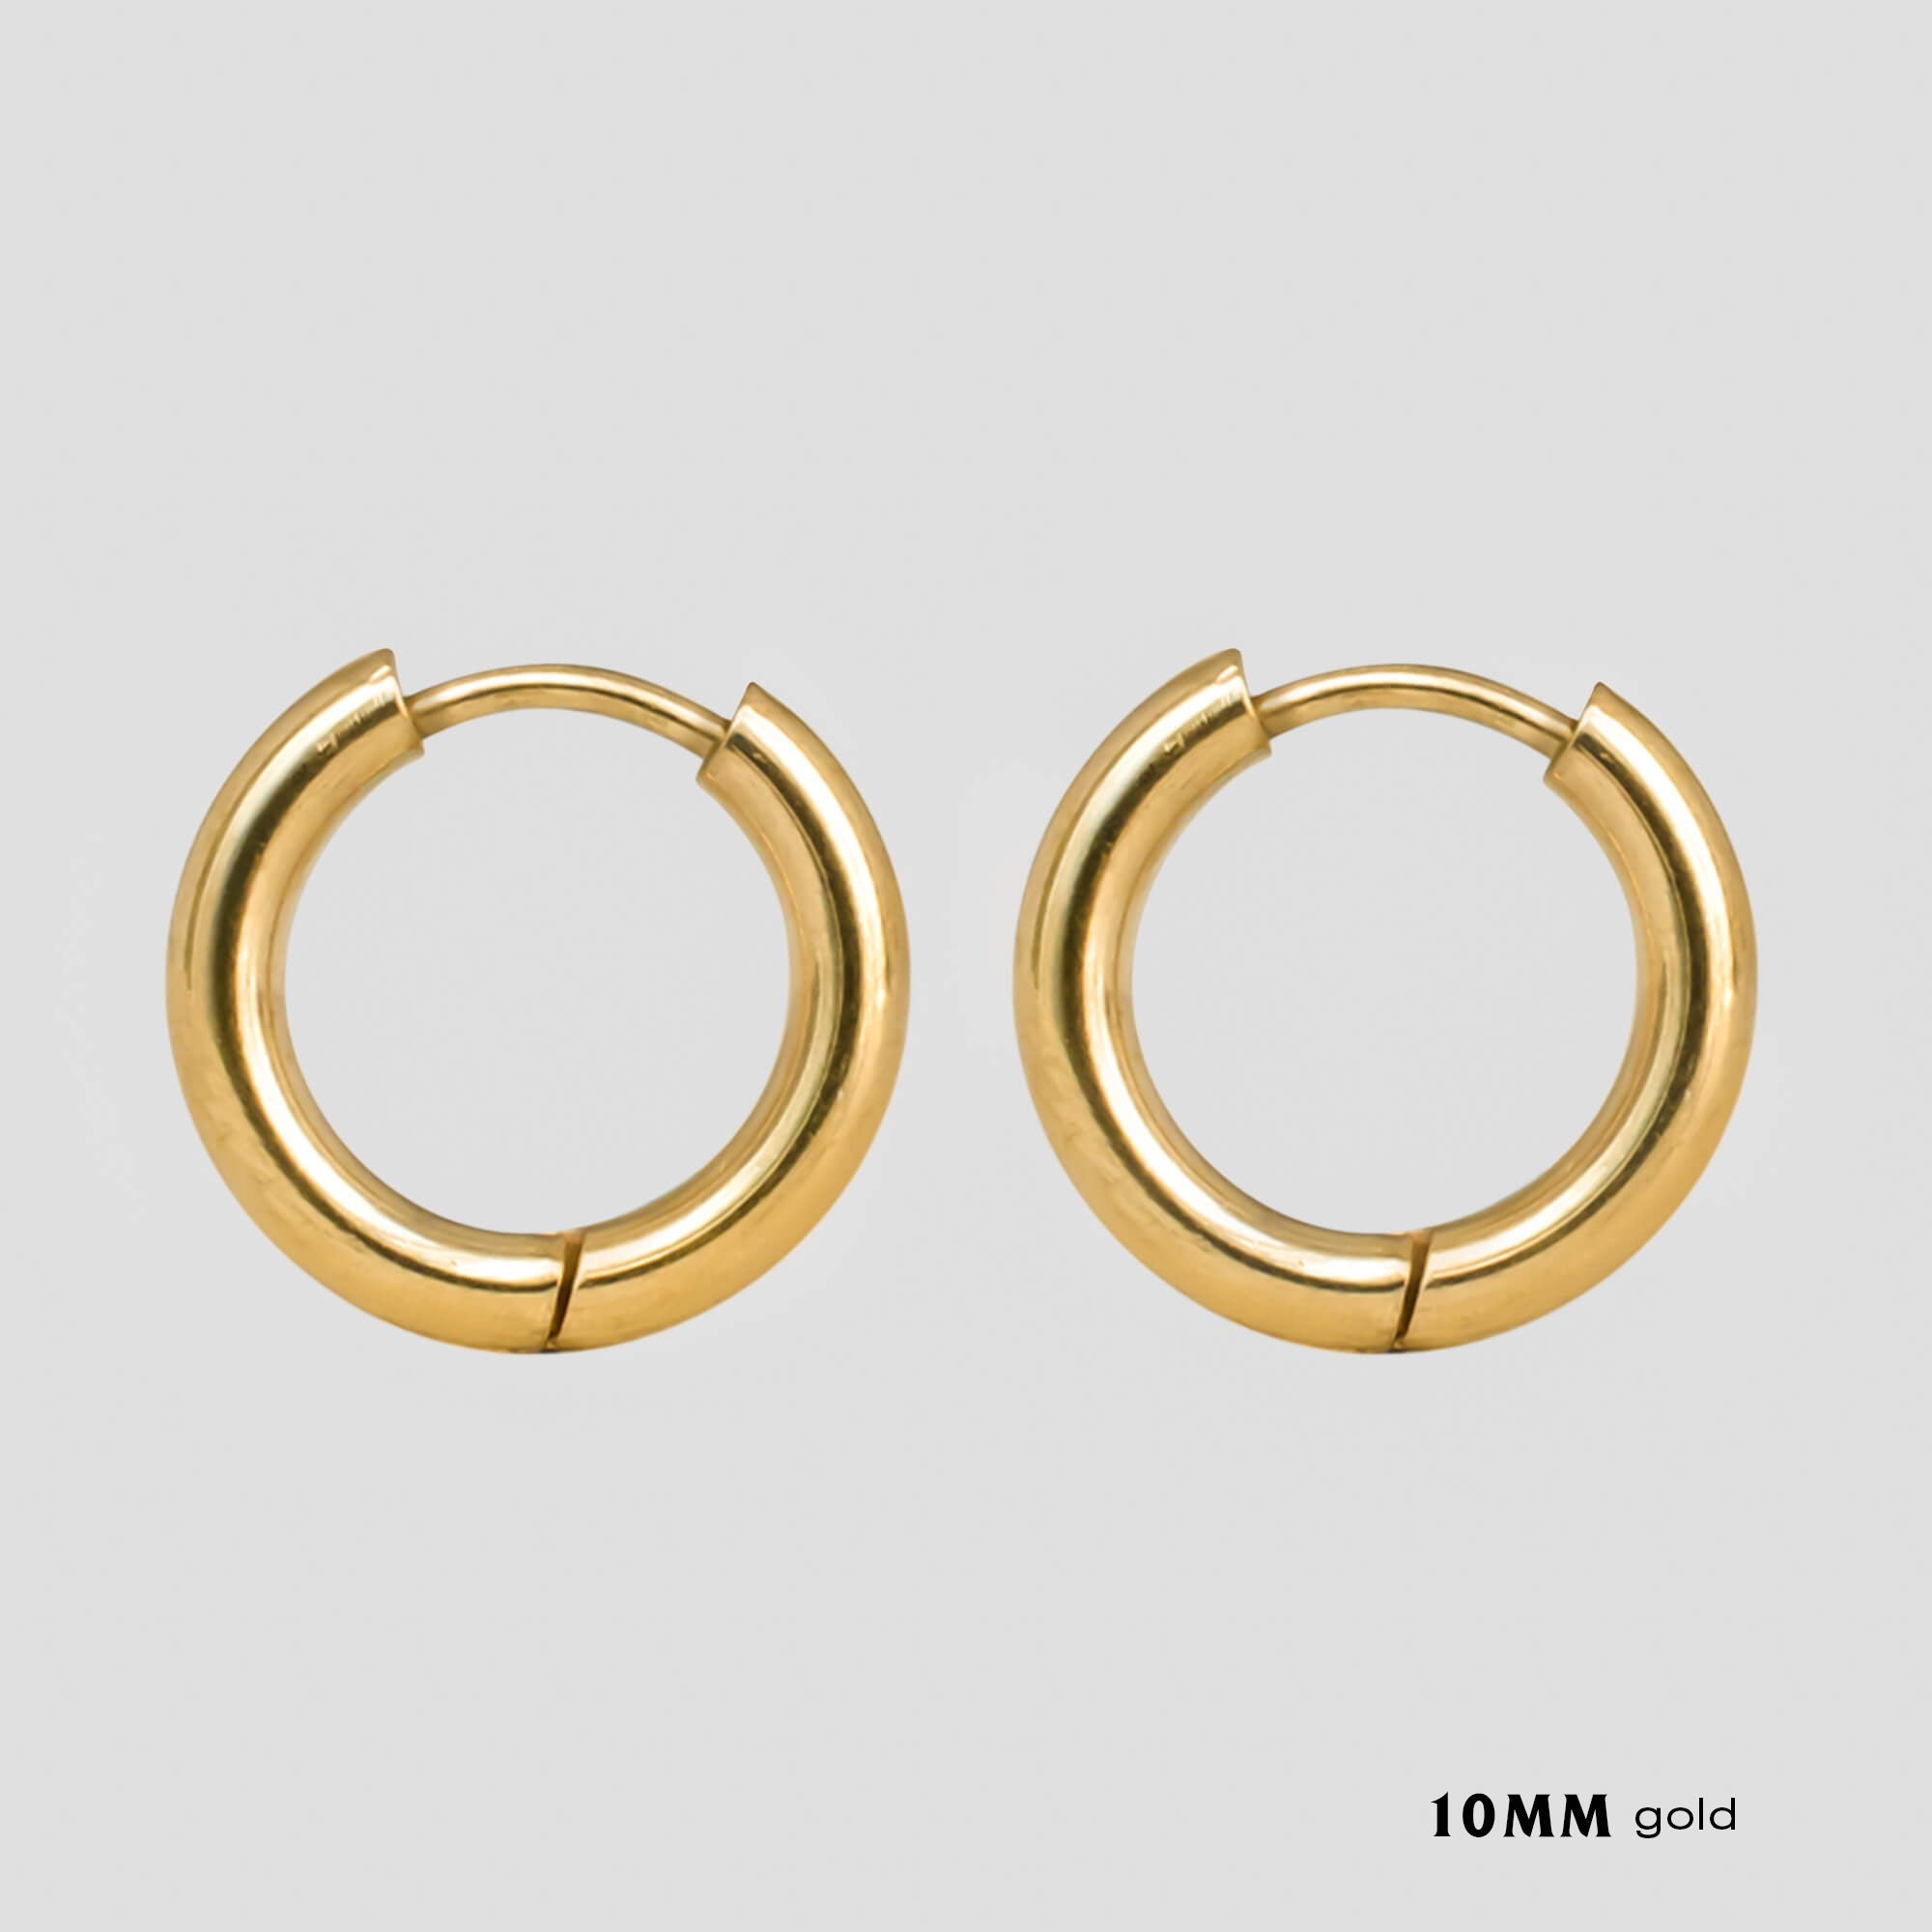 Buy Traditional Gold Plated Hoop Earrings Girls and Women Earrings/Size 2  cm at Amazon.in